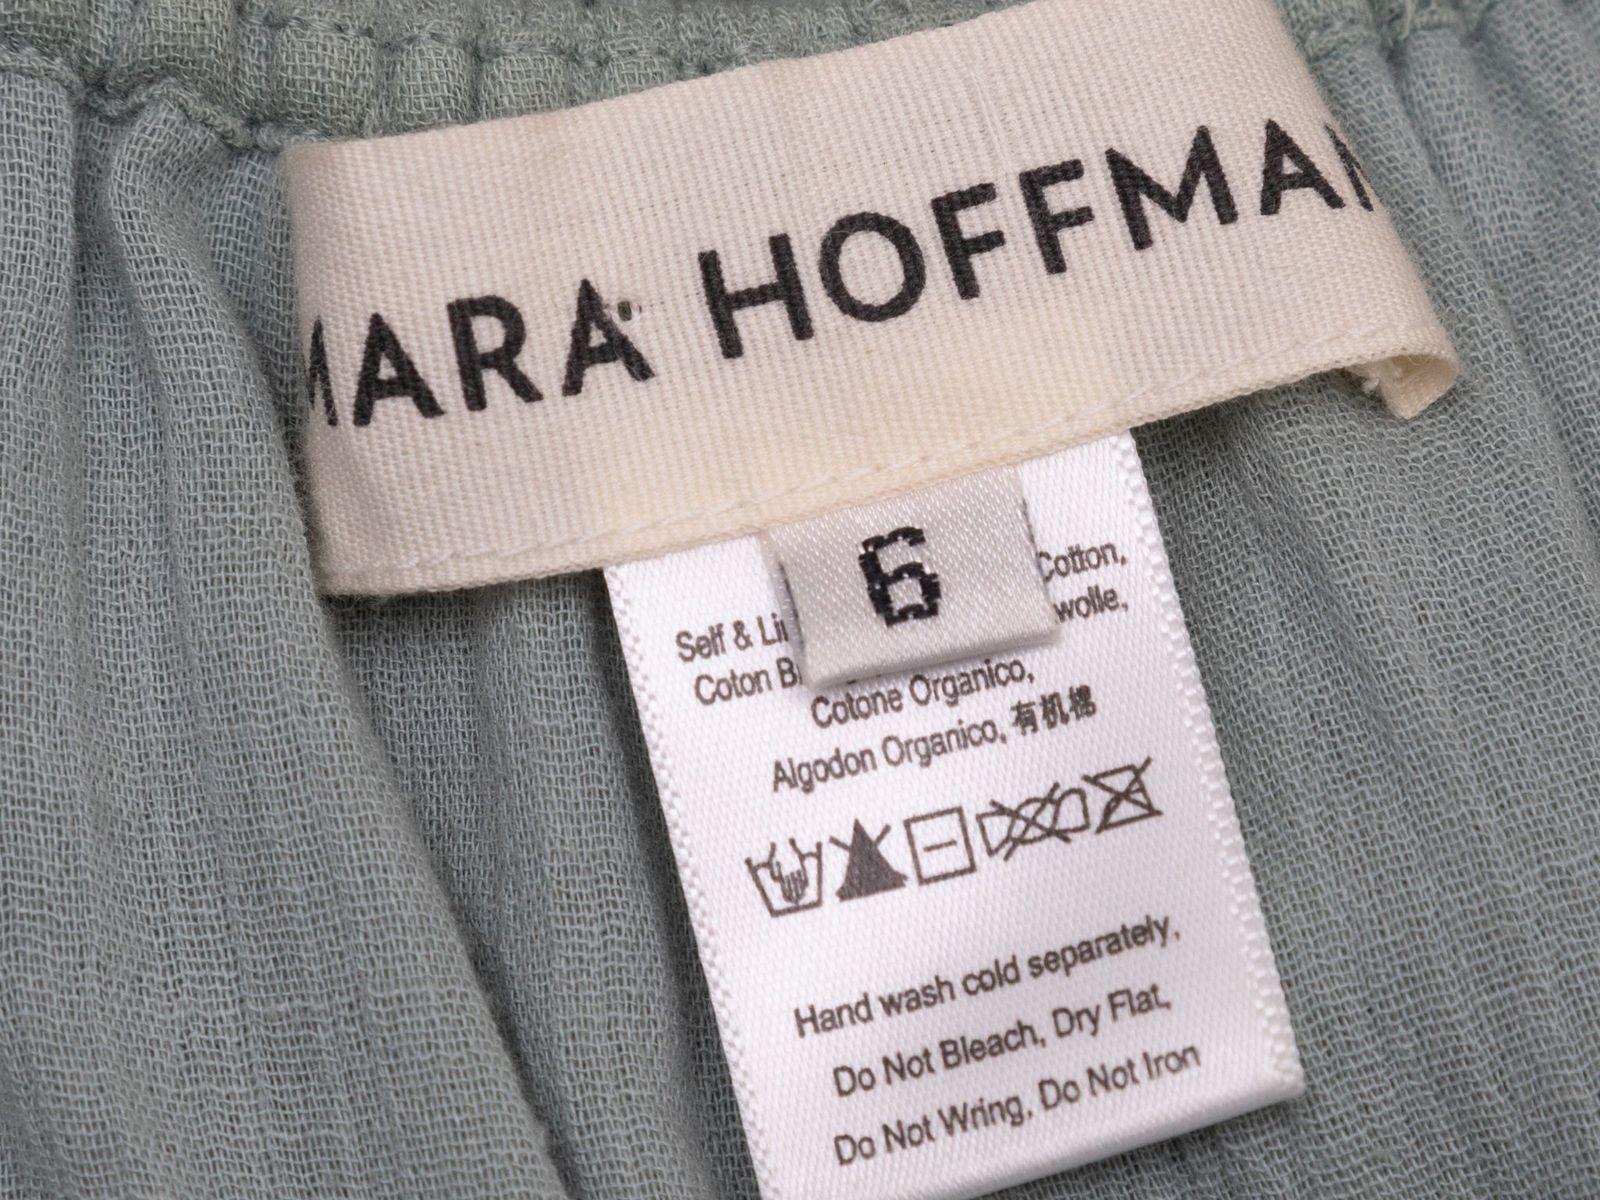 Product Details: Sage green cotton dress by Mara Hoffman. Round neckline. Cap sleeves. Dual hip pockets. Sash tie at back of waist. Button closures at center front. 36